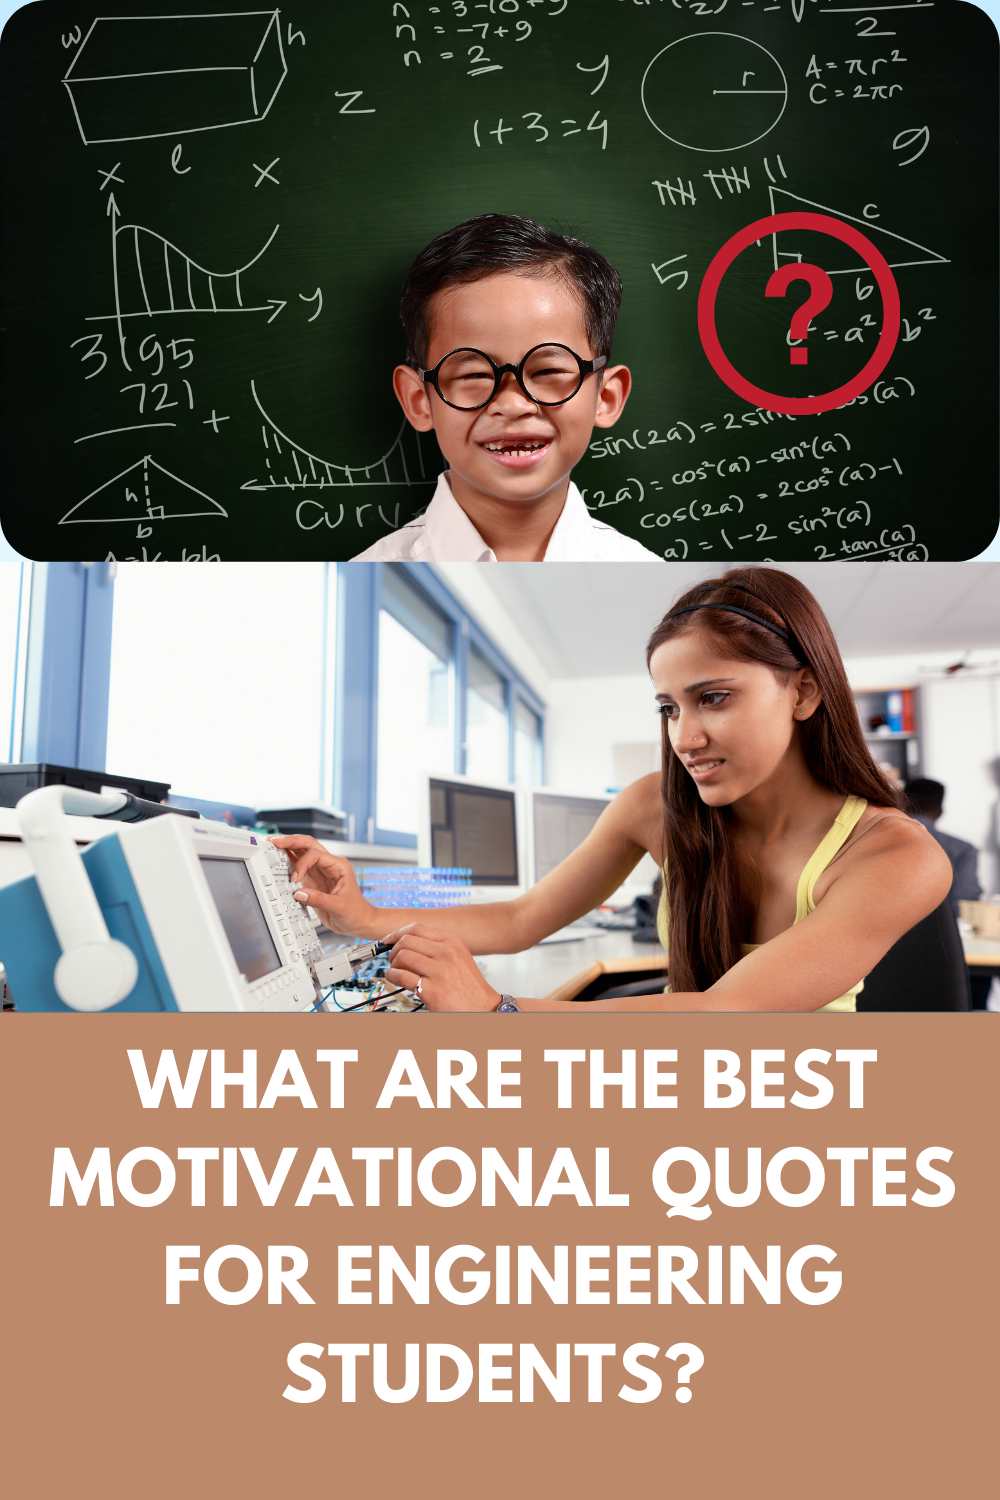 What Are The Best Motivational Quotes For Engineering Students? (18